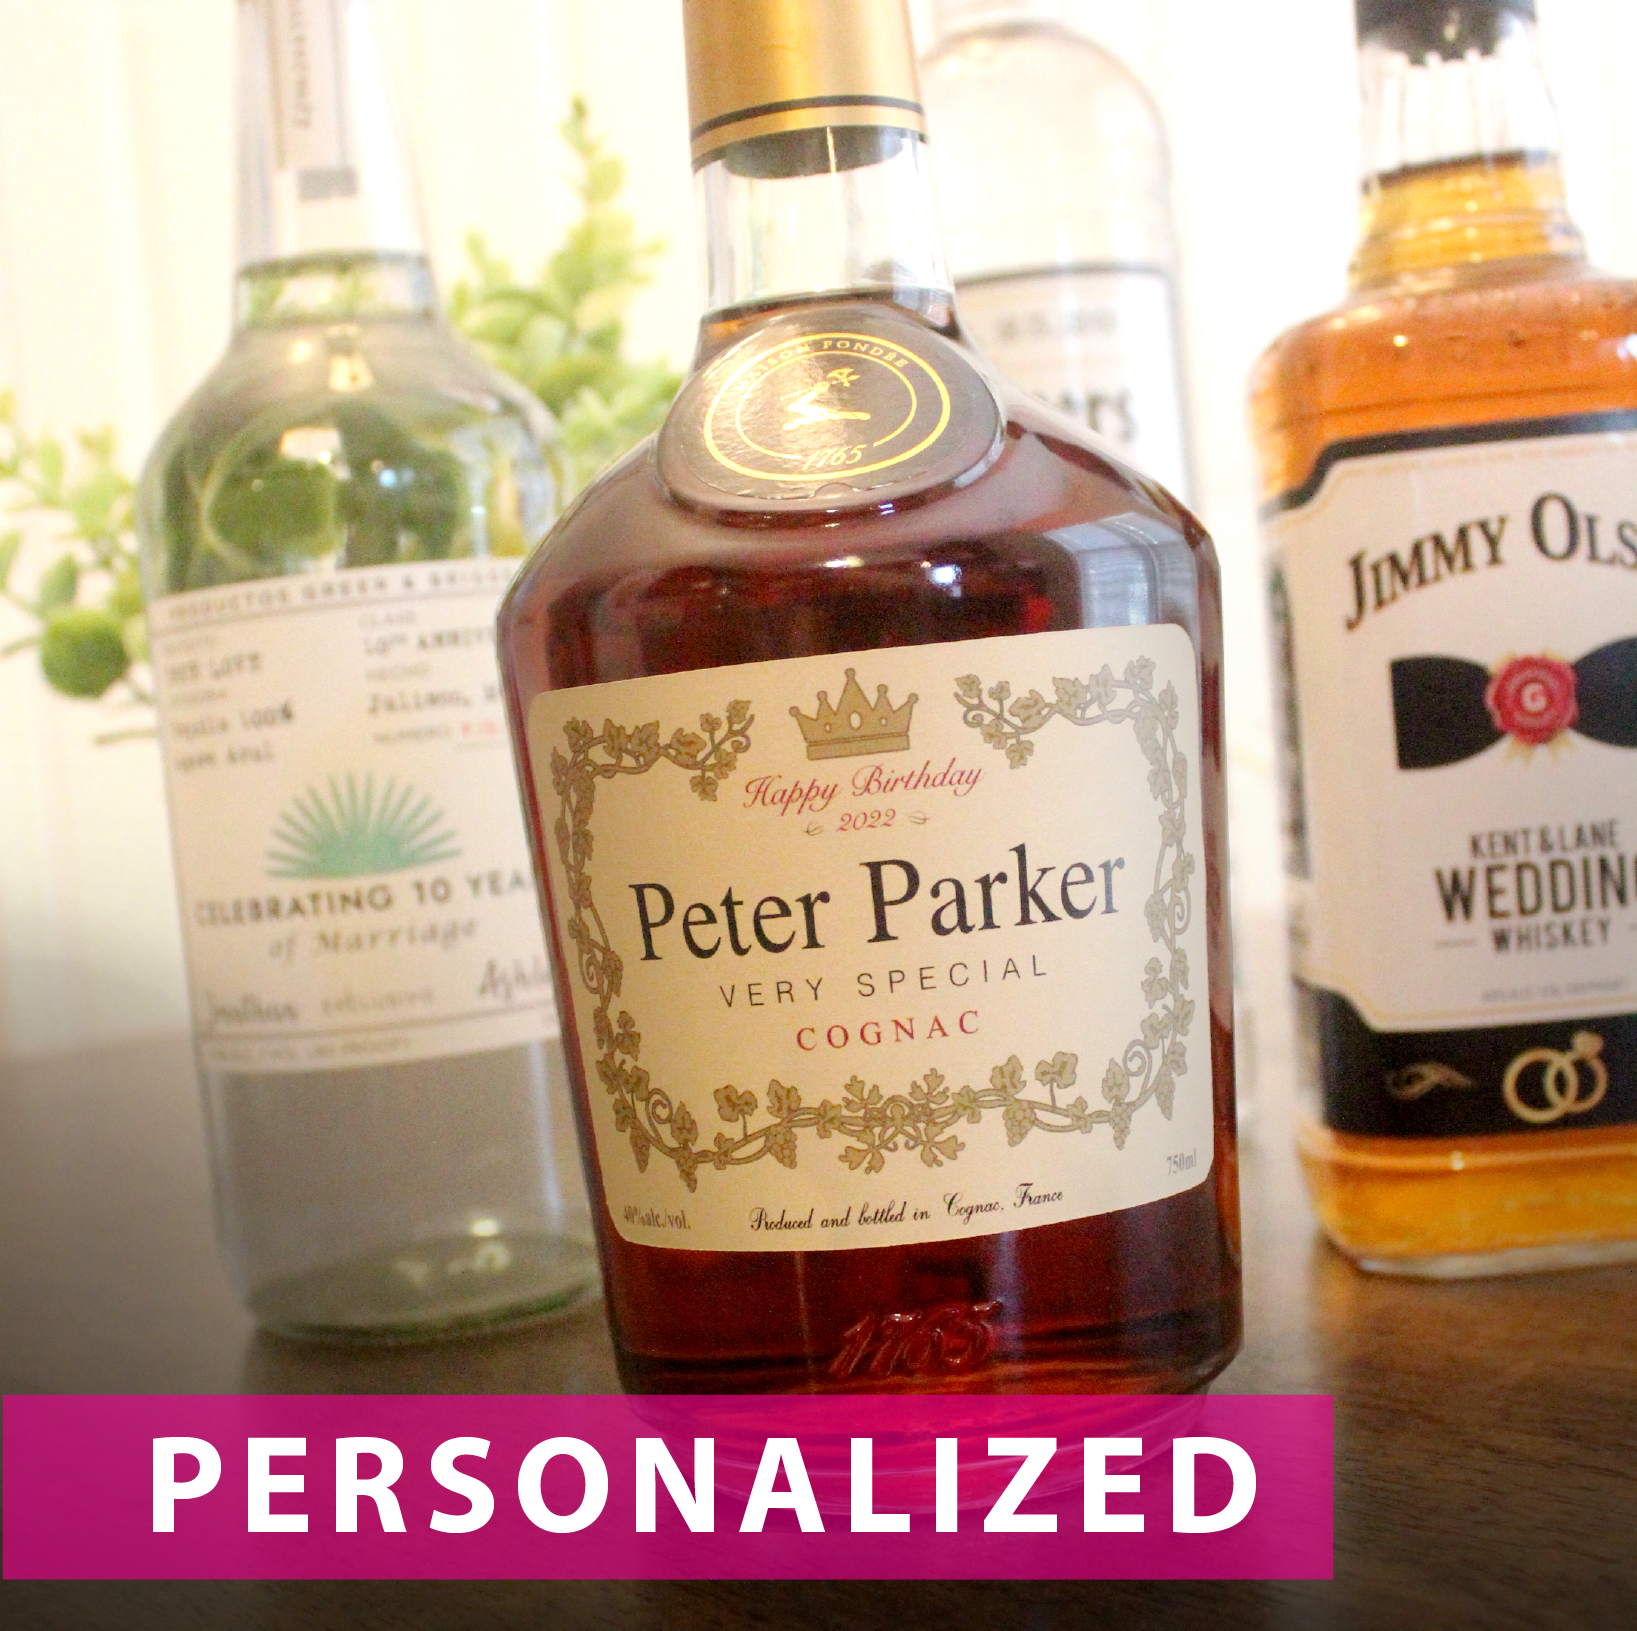 Personalized Labels to fit Hennessy Cognac Bottle. Previouly sold on Etsy.